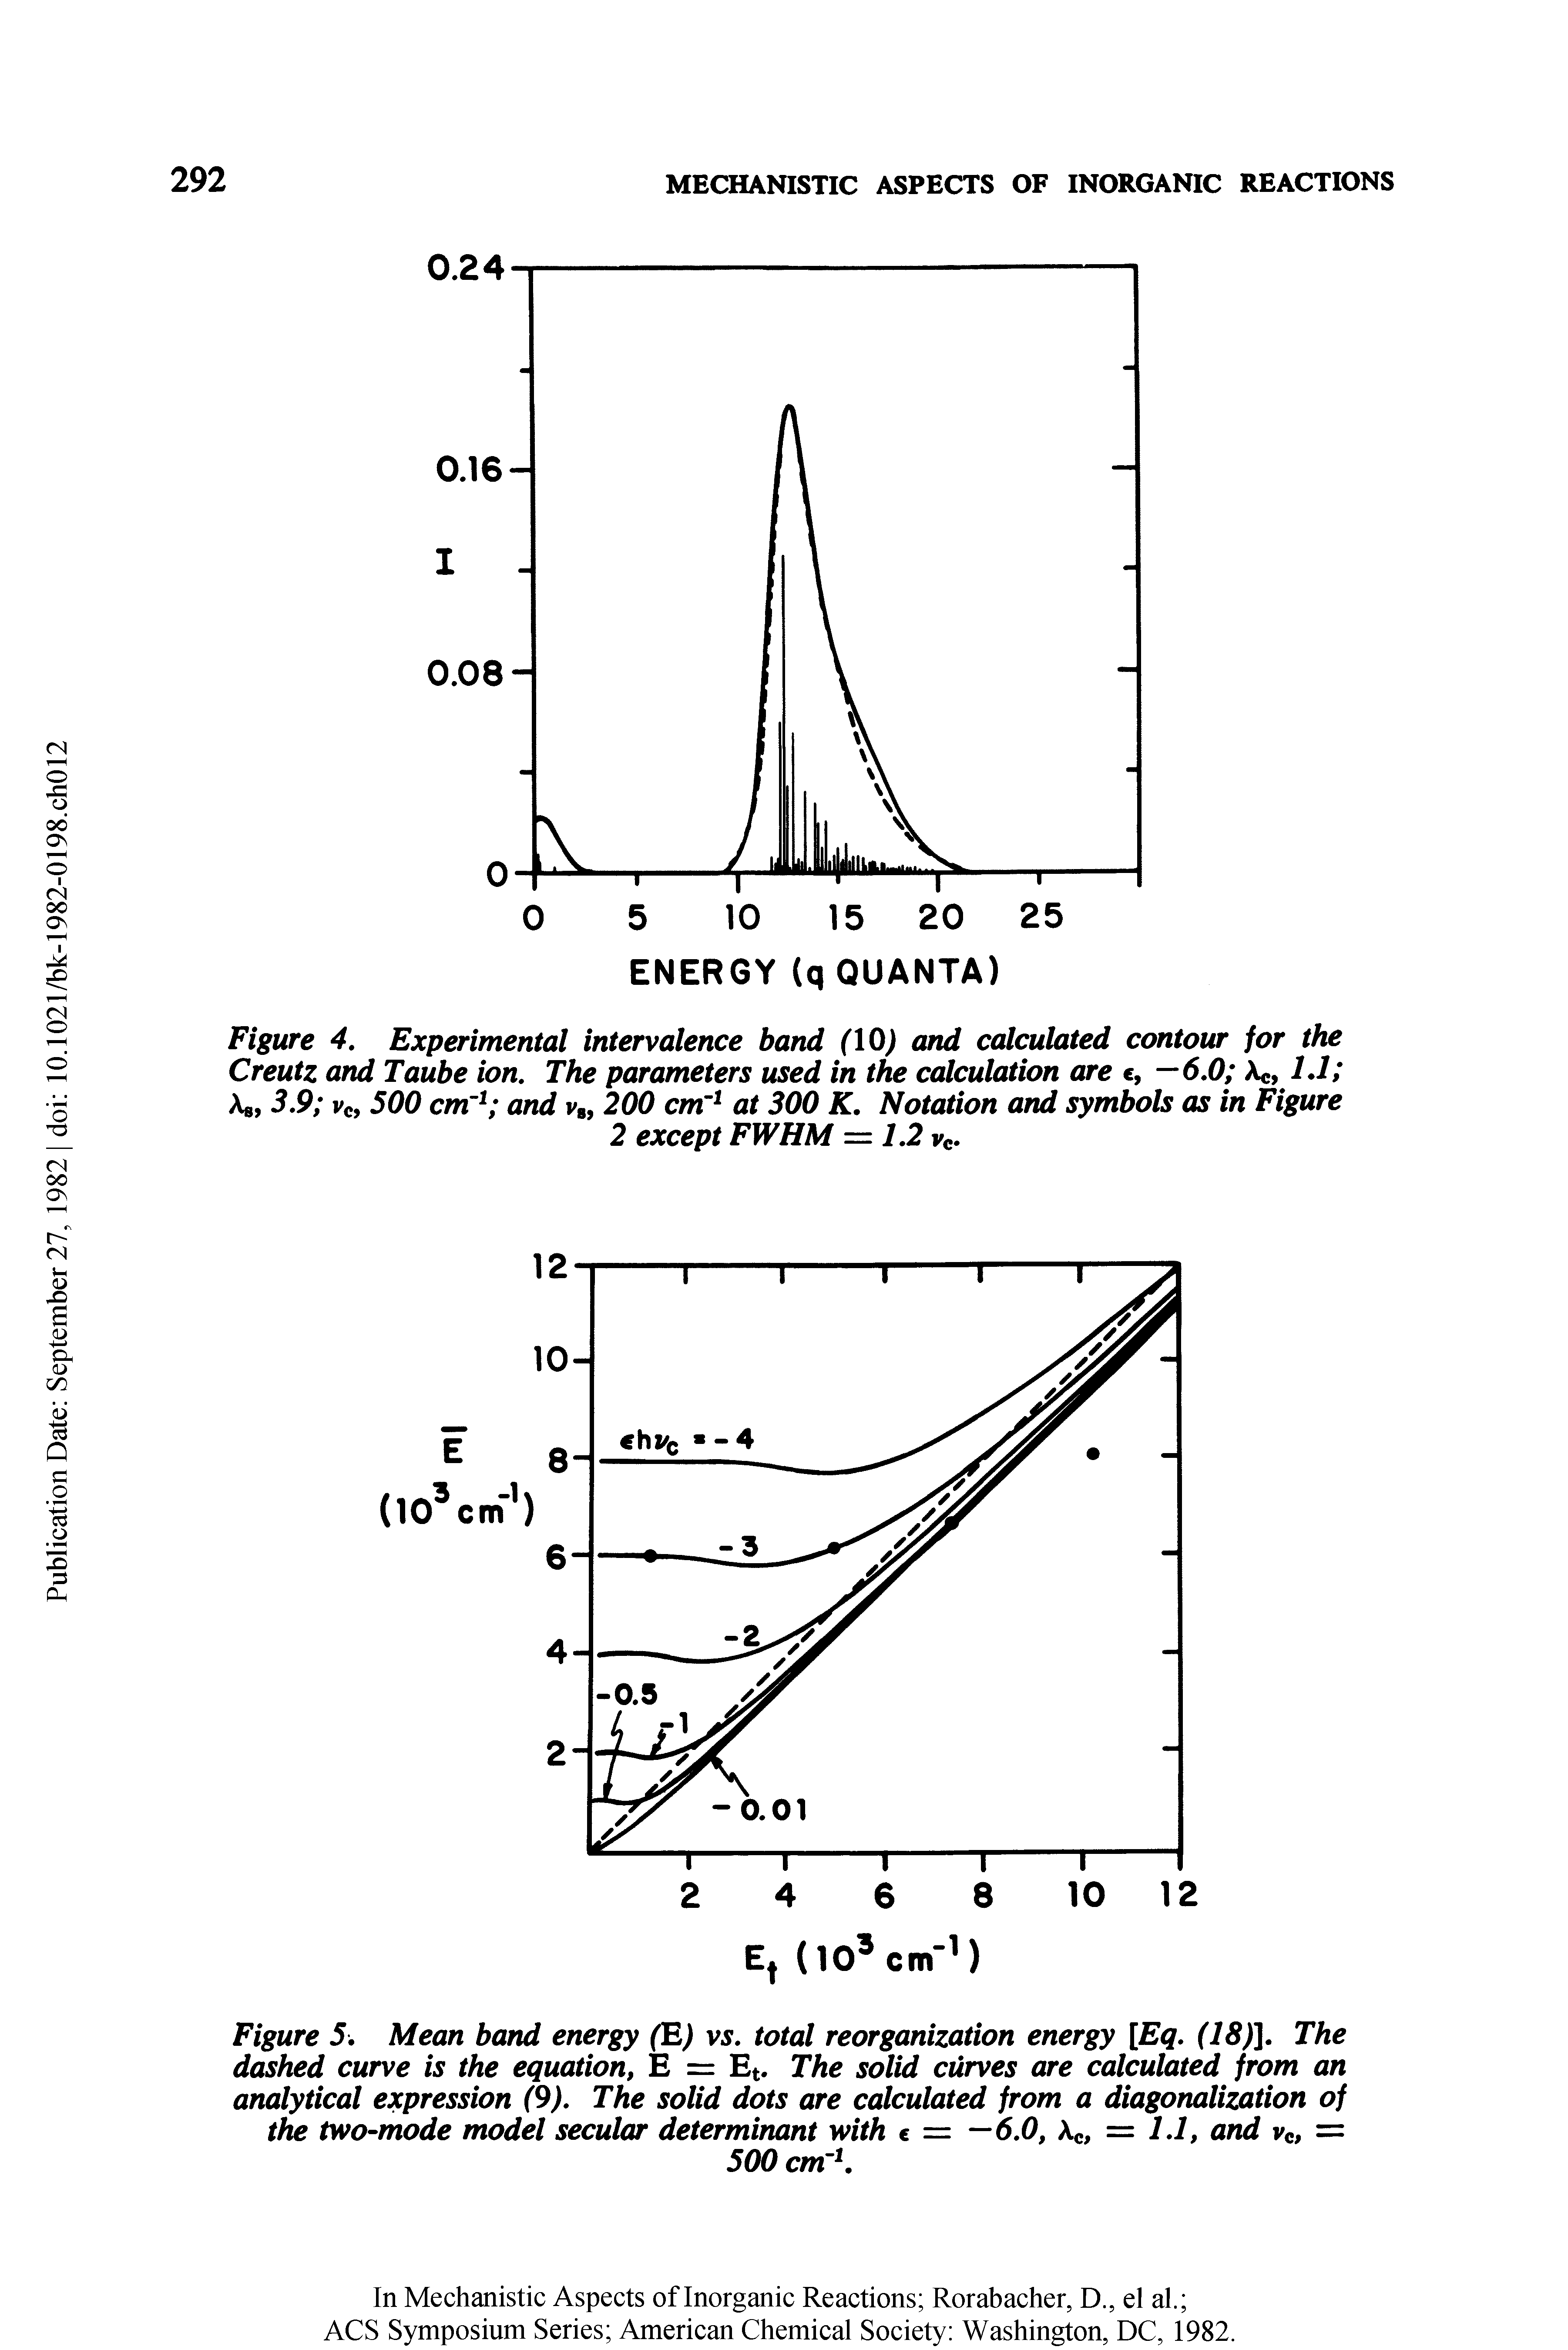 Figure 5. Mean band energy (E) vs. total reorganization energy [Eq. (18)]. The dashed curve is the equation, E = Et. The solid curves are calculated from an analytical expression (9). The solid dots are calculated from a diagonalization of the two-mode model secular determinant with c = —6.0, Ac, = 1.1, and vc, =...